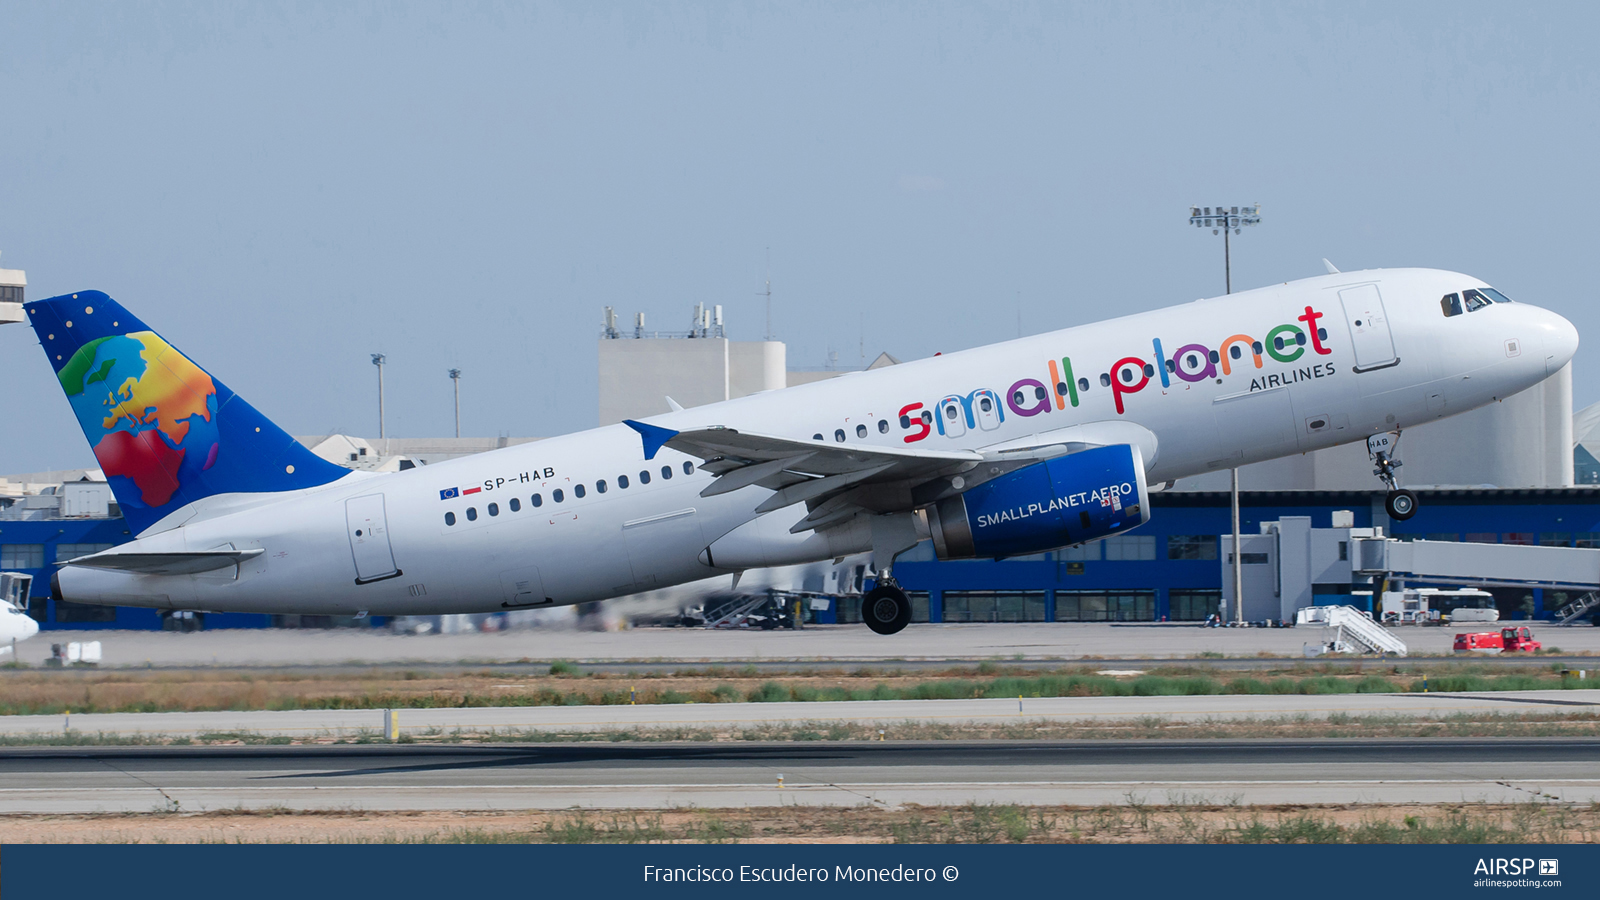 Small Planet Airlines  Airbus A320  SP-HAB